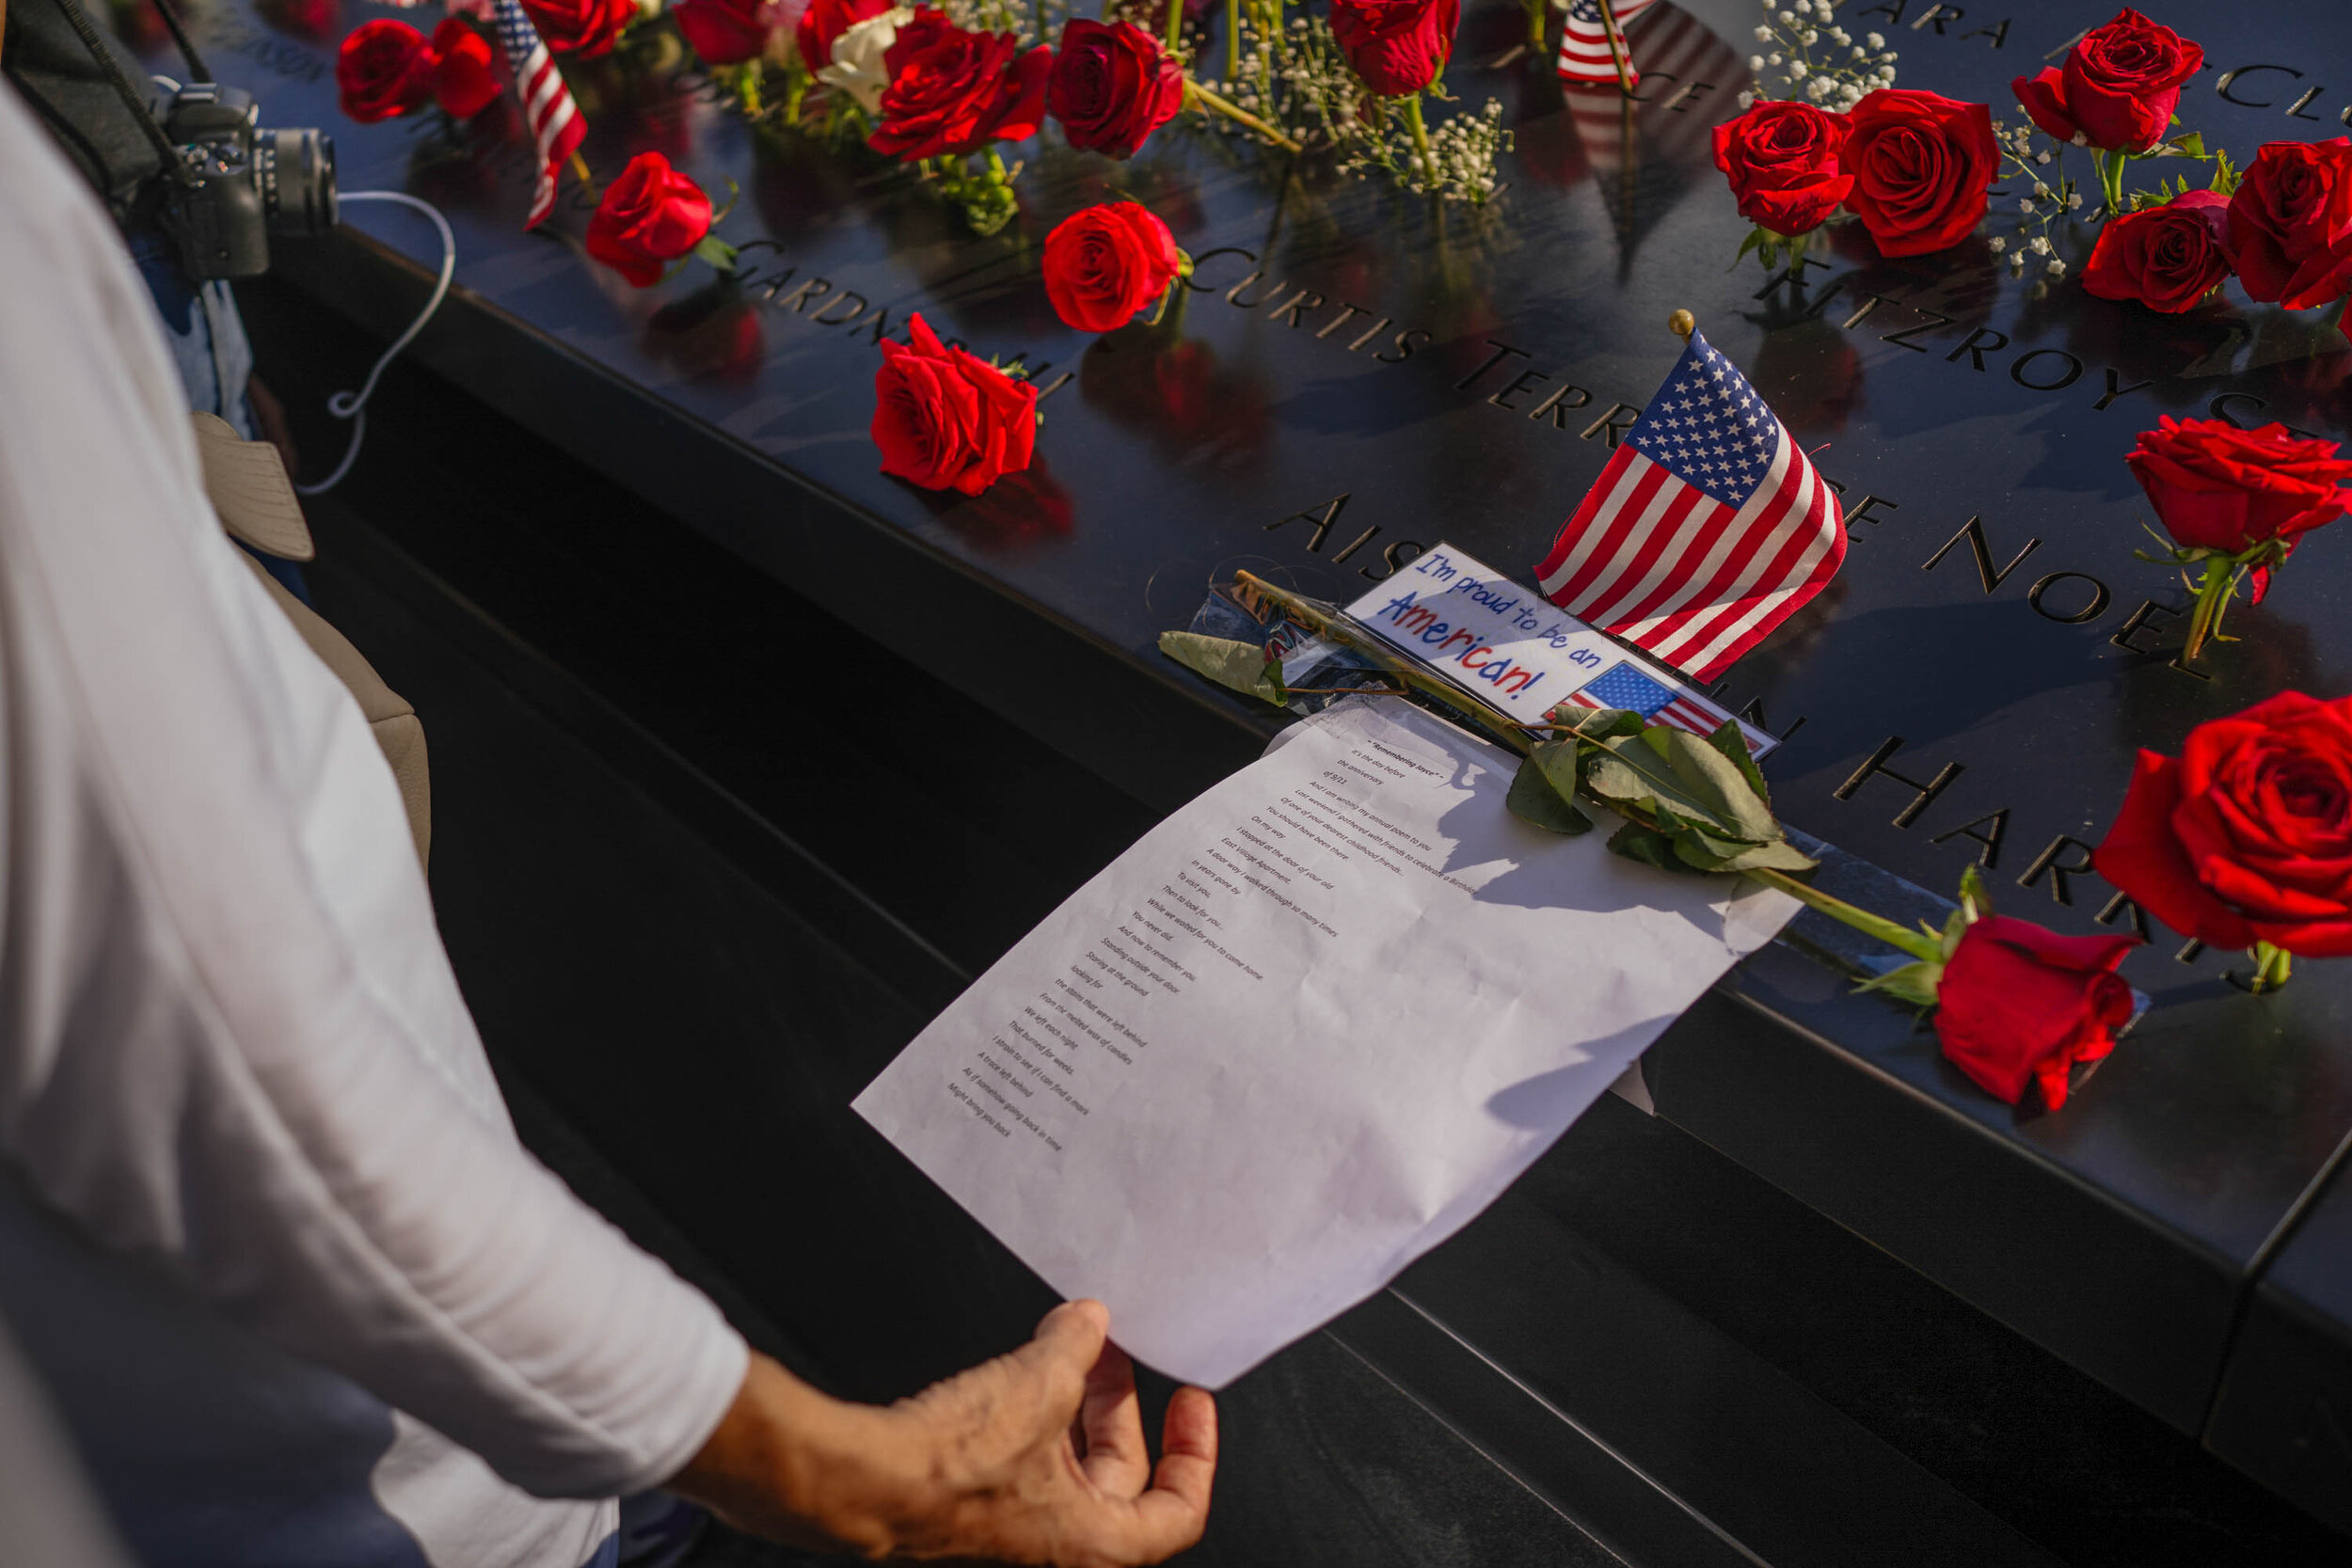  Mourners remember 9/11 victims at ground zero on 18th anniversary of terror attacks of September 11, 2001.  